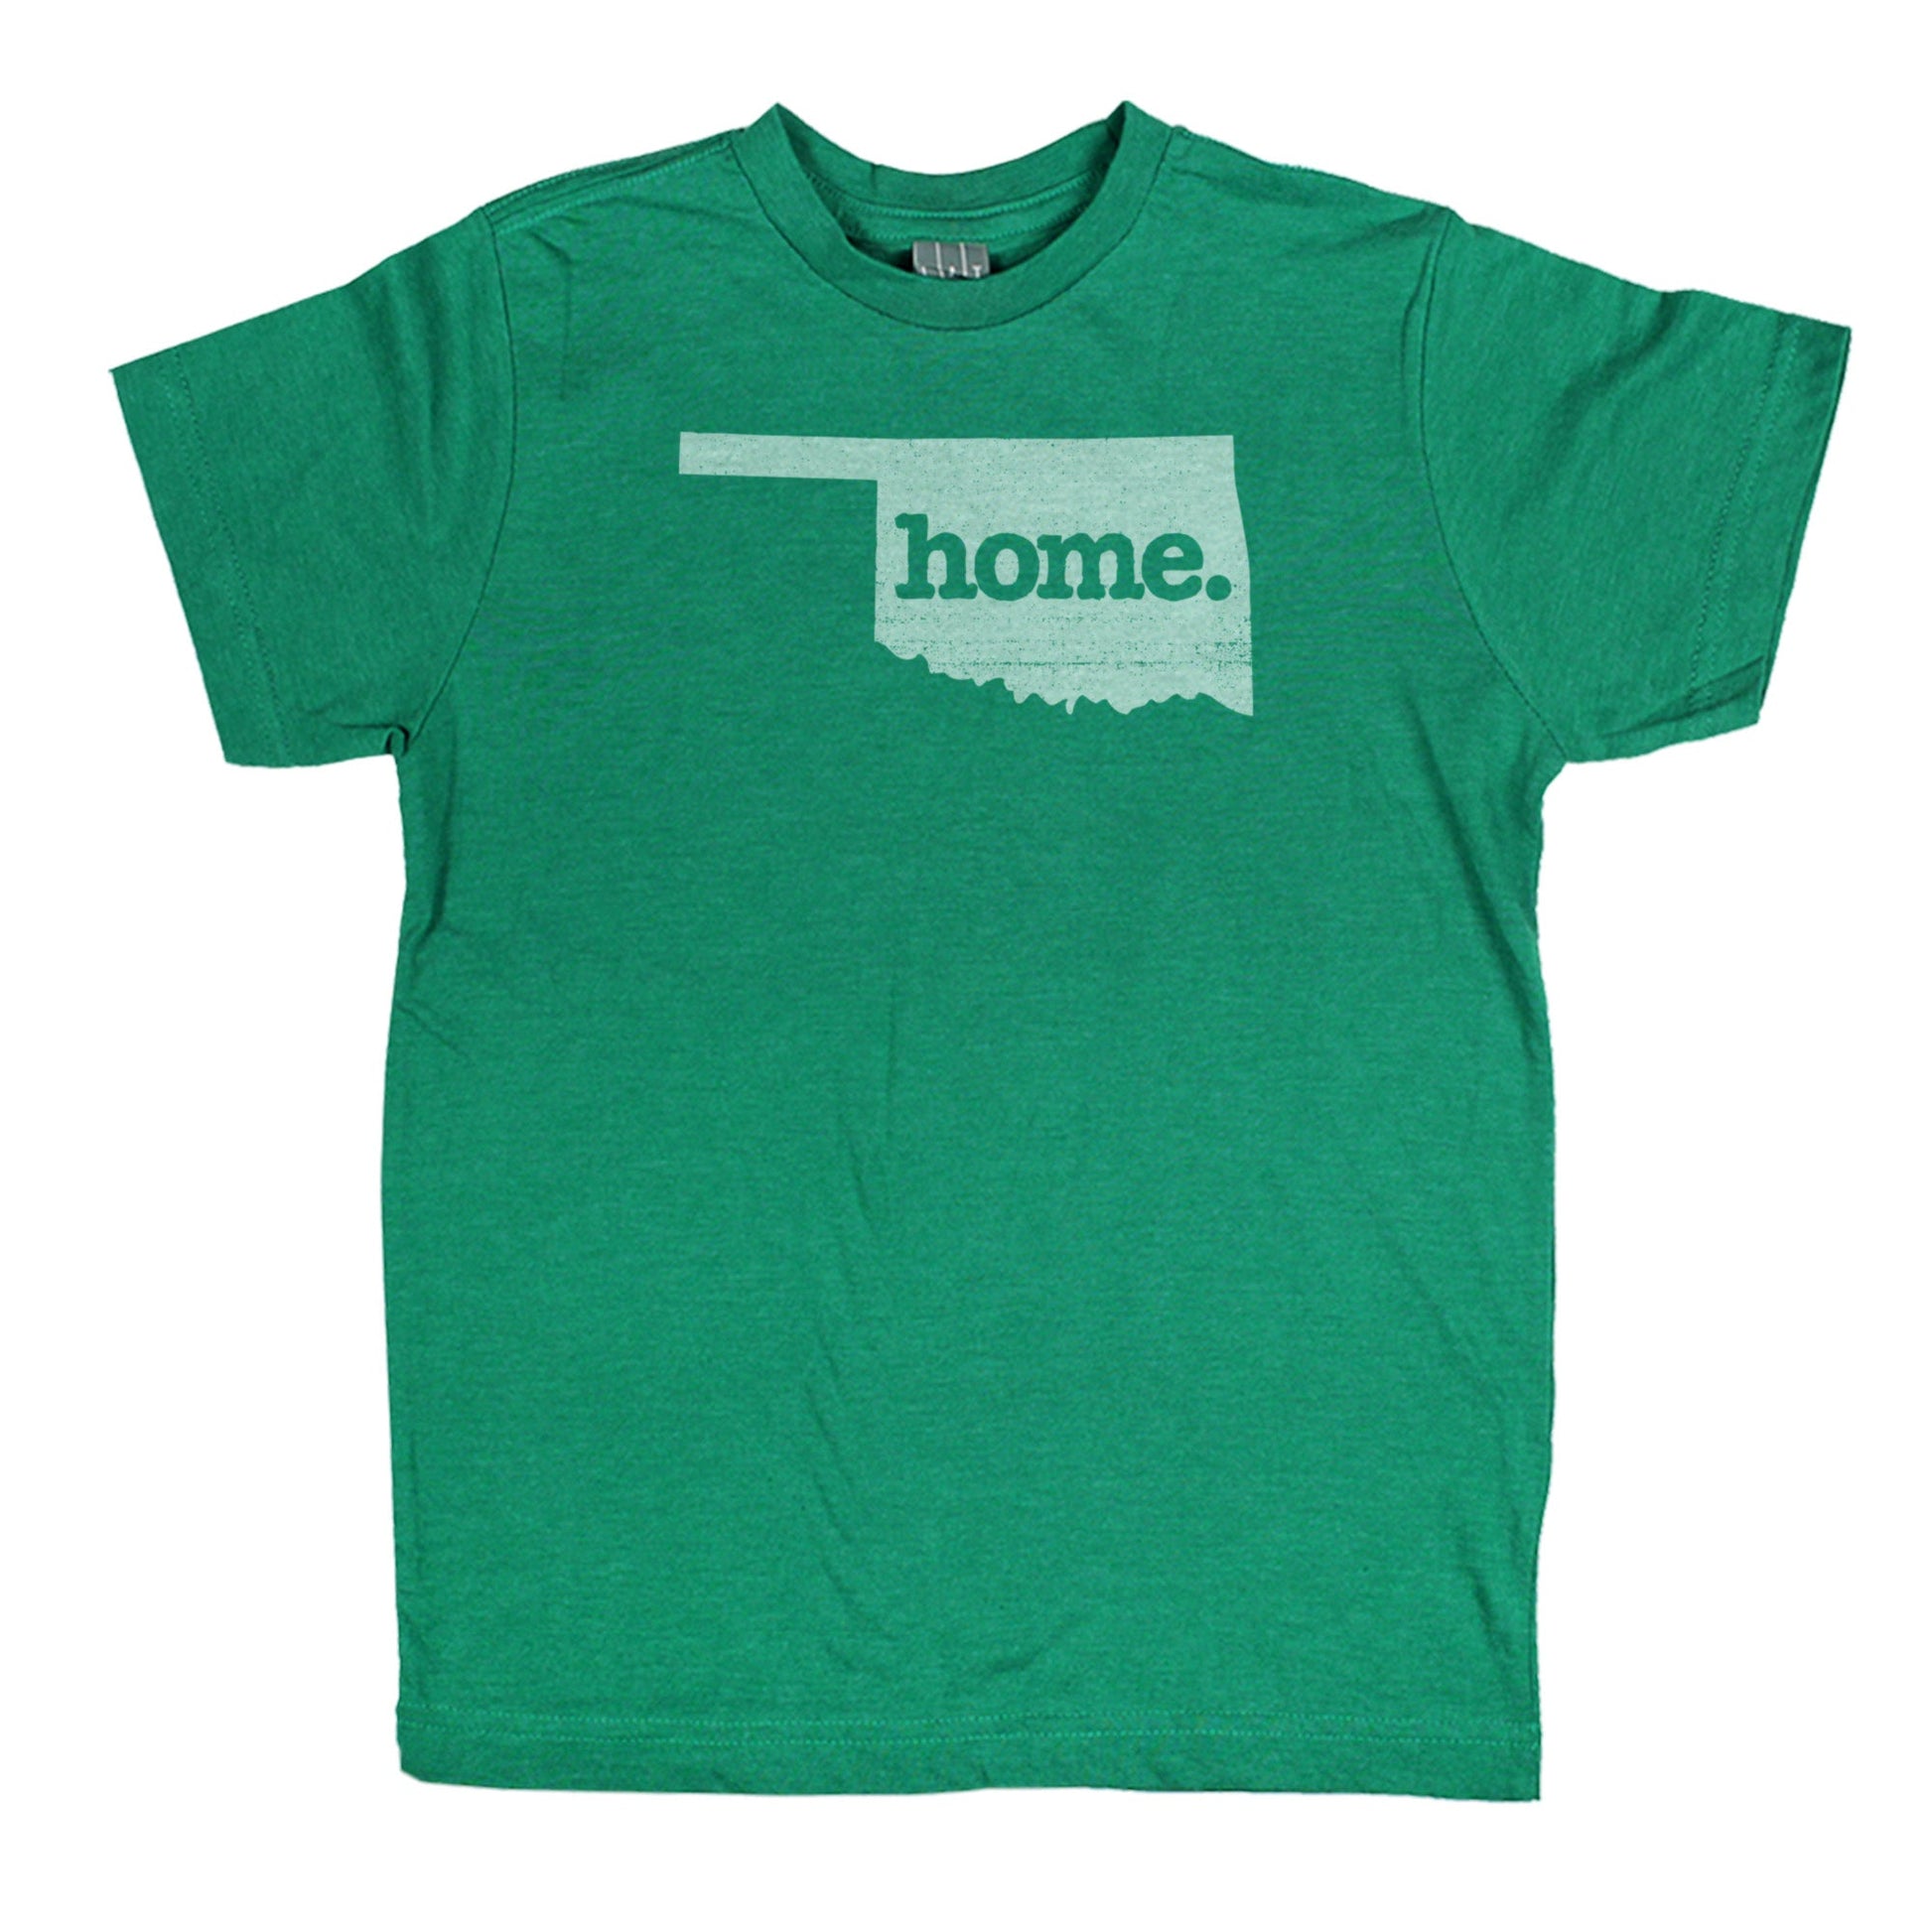 home. Youth/Toddler T-Shirt - Oklahoma – Home State Apparel